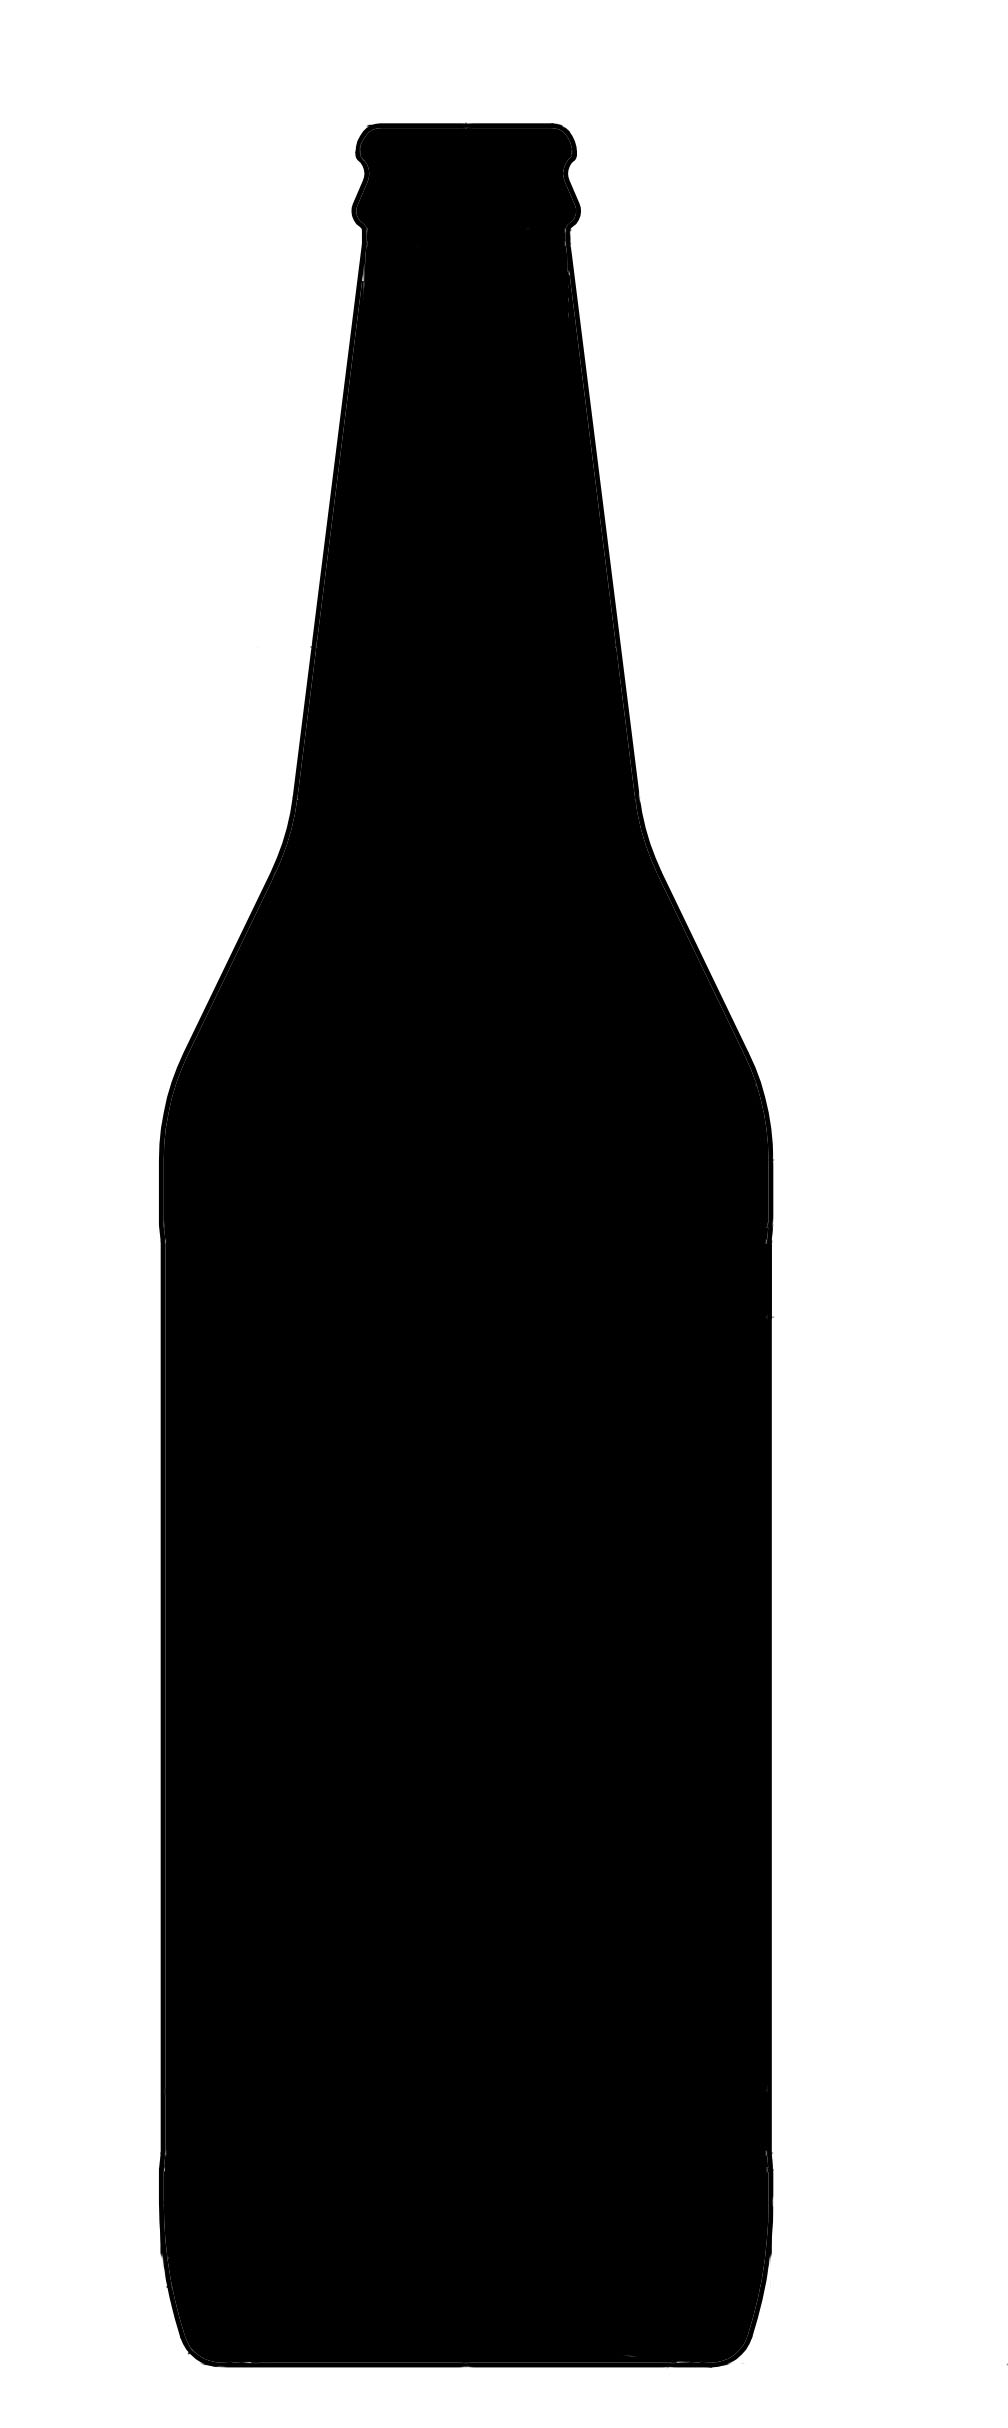 Images For > Beer Glass Silhouette